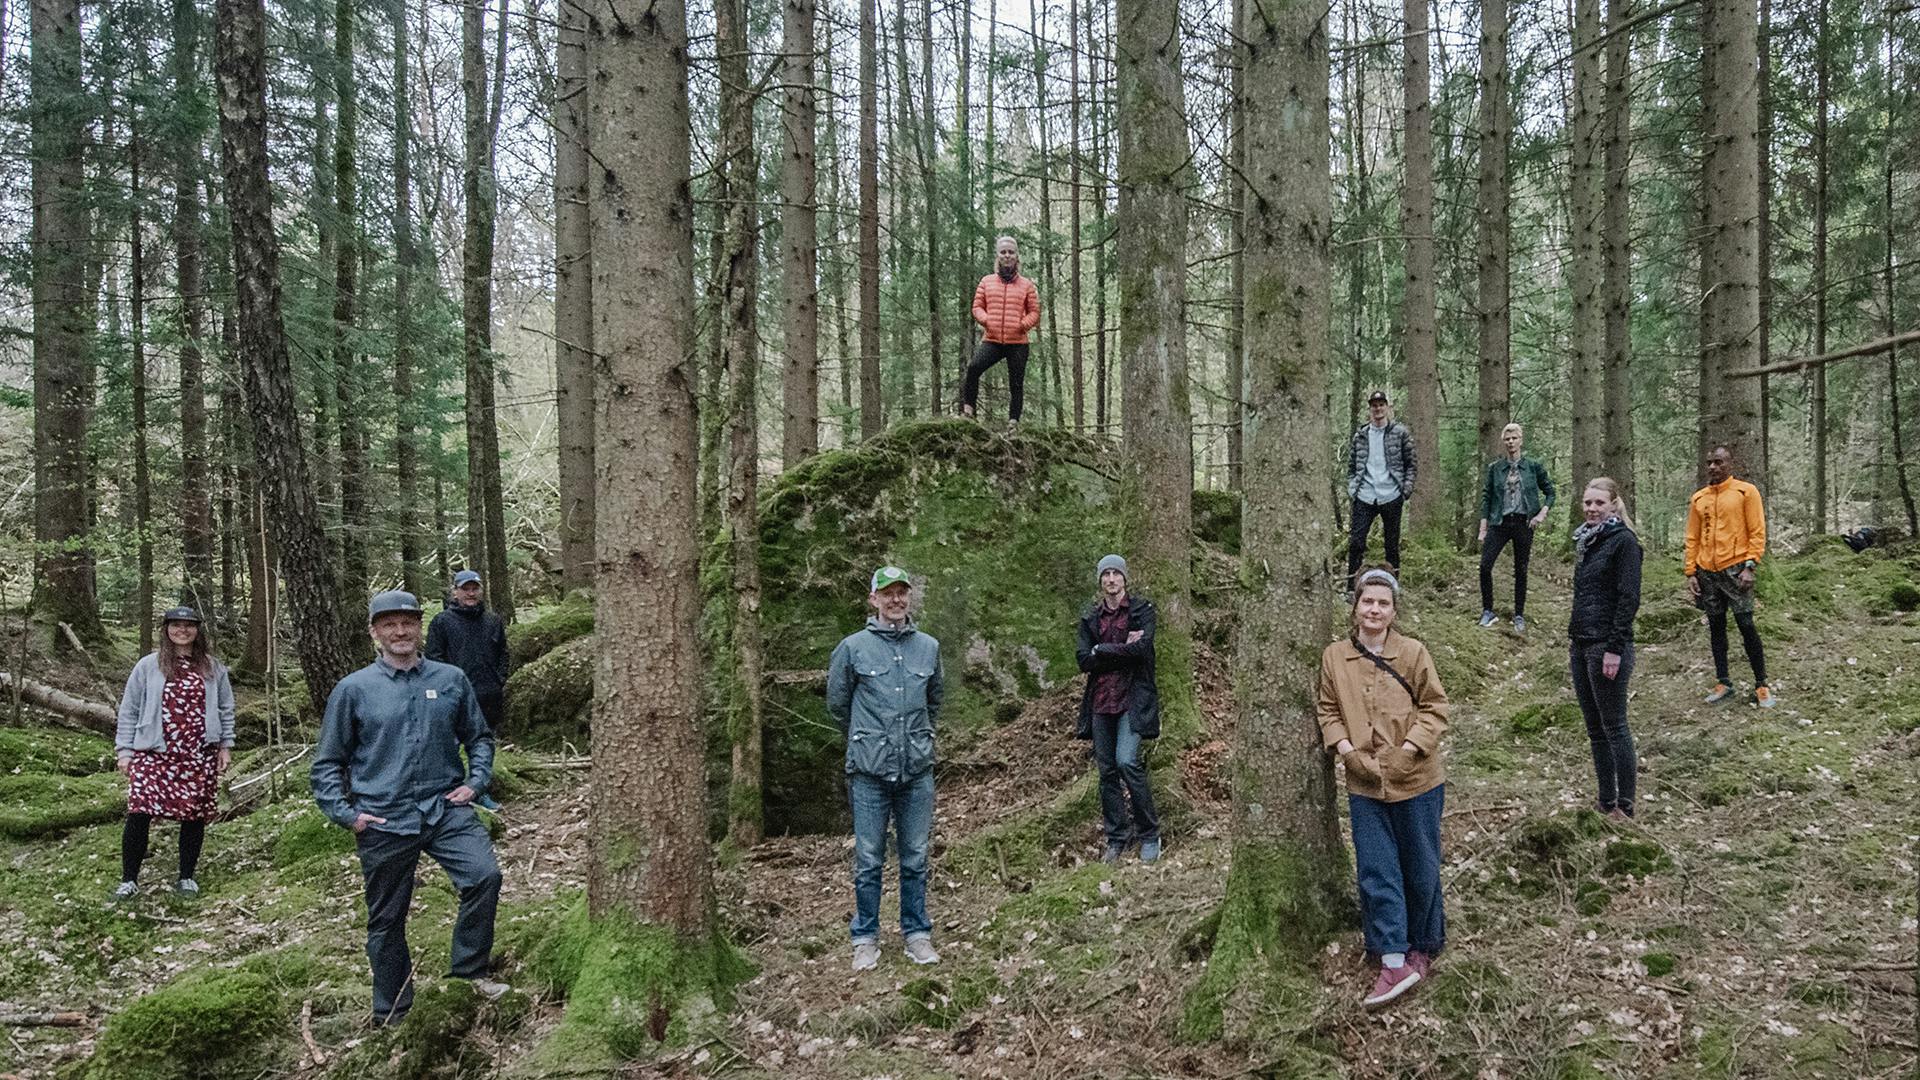 Image of Icebug employees standing in the forest